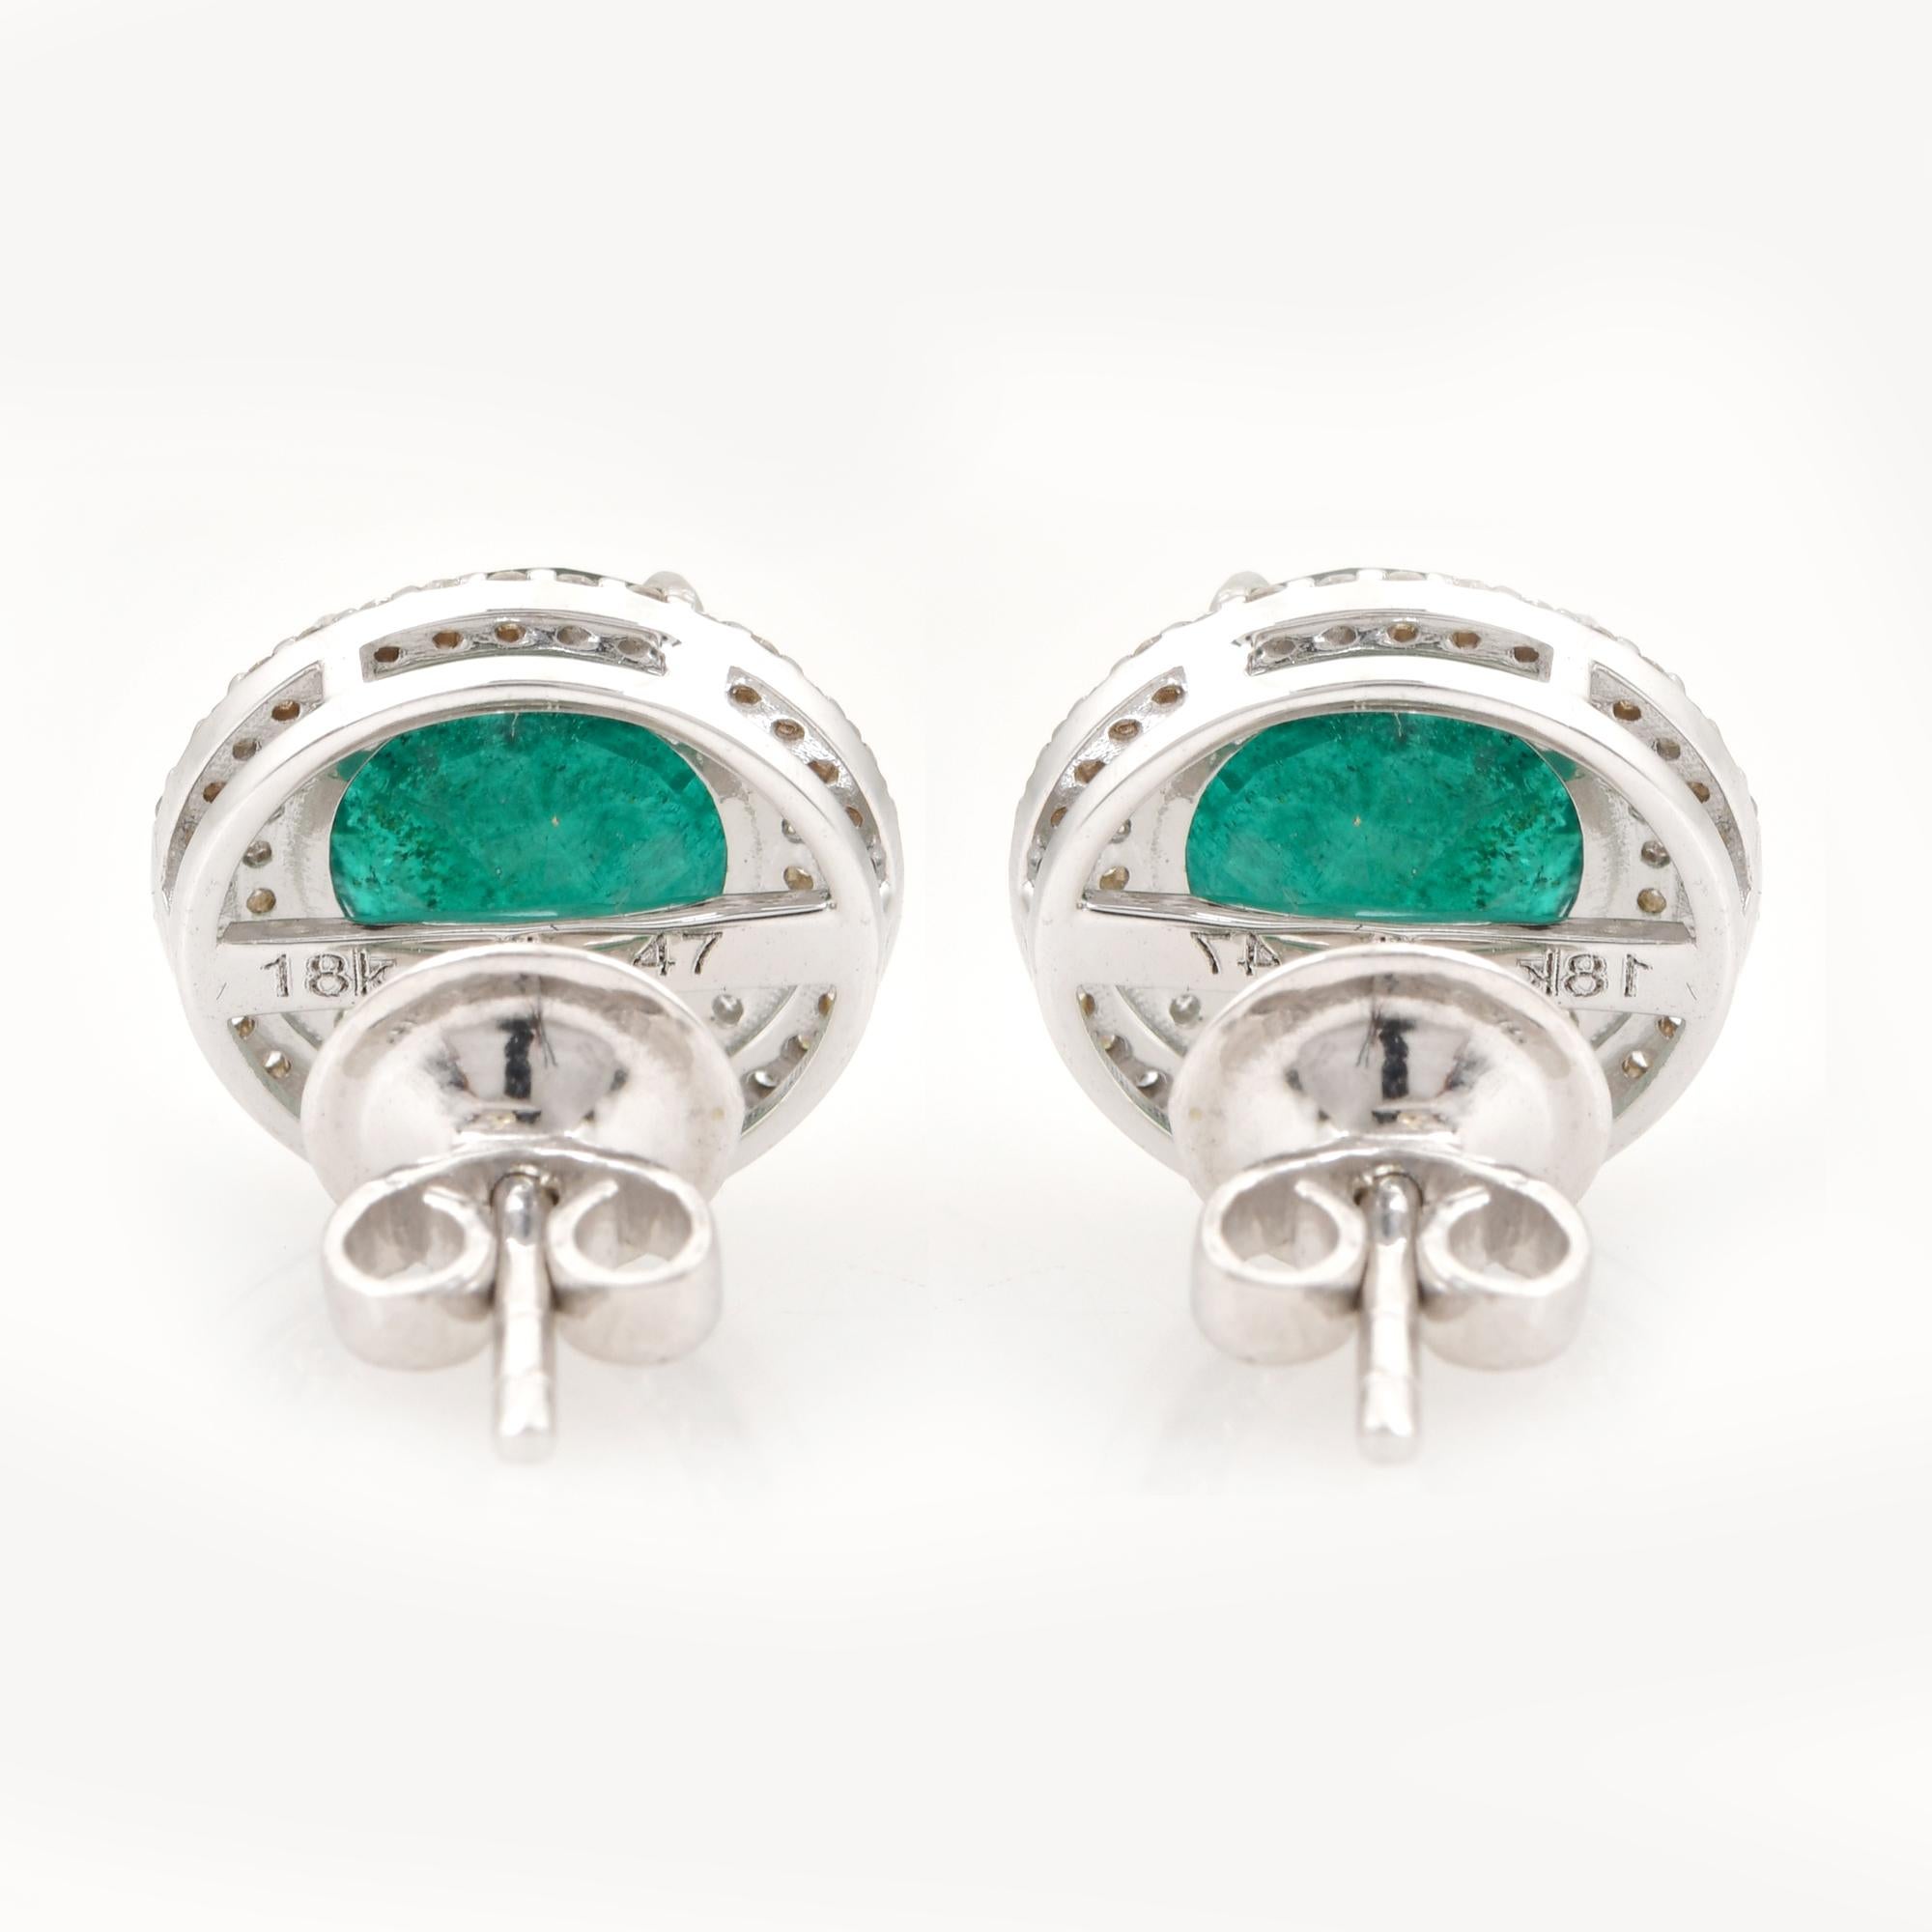 Round Cut Natural Emerald Gemstone Stud Earrings Diamond Pave Solid 18k White Gold Jewelry For Sale